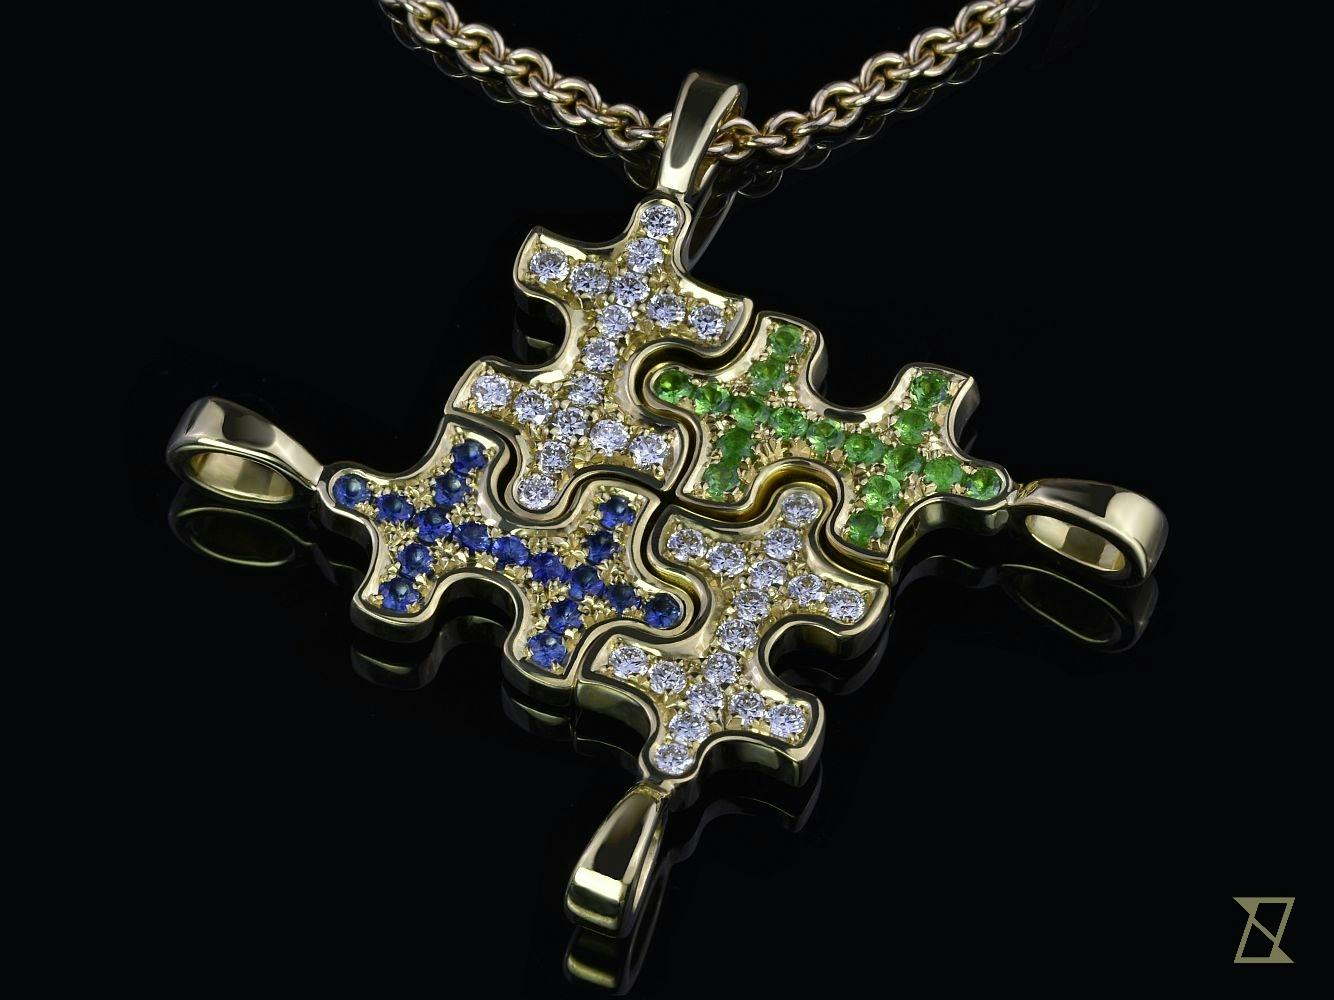 4 puzzles become one necklace. 